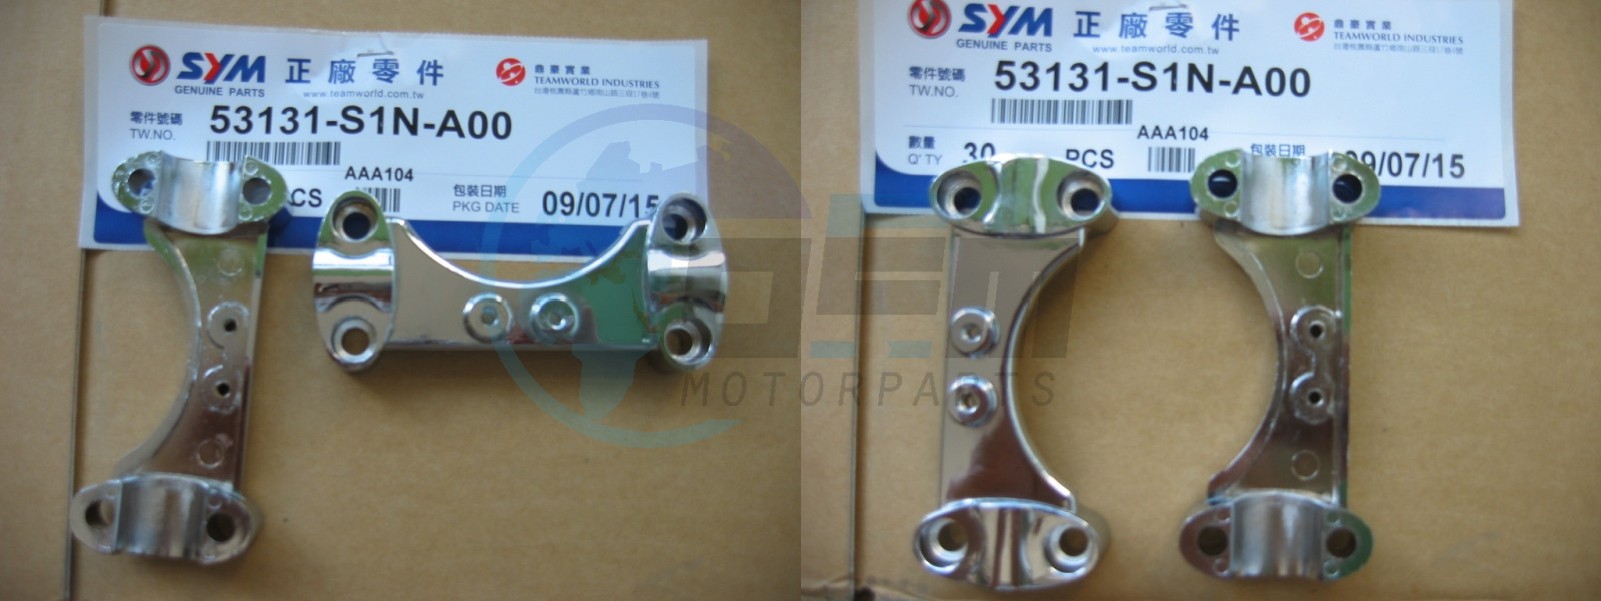 Product image: Sym - 53131-S1N-A00 - HANDLE PIPE UP HOLDER  0